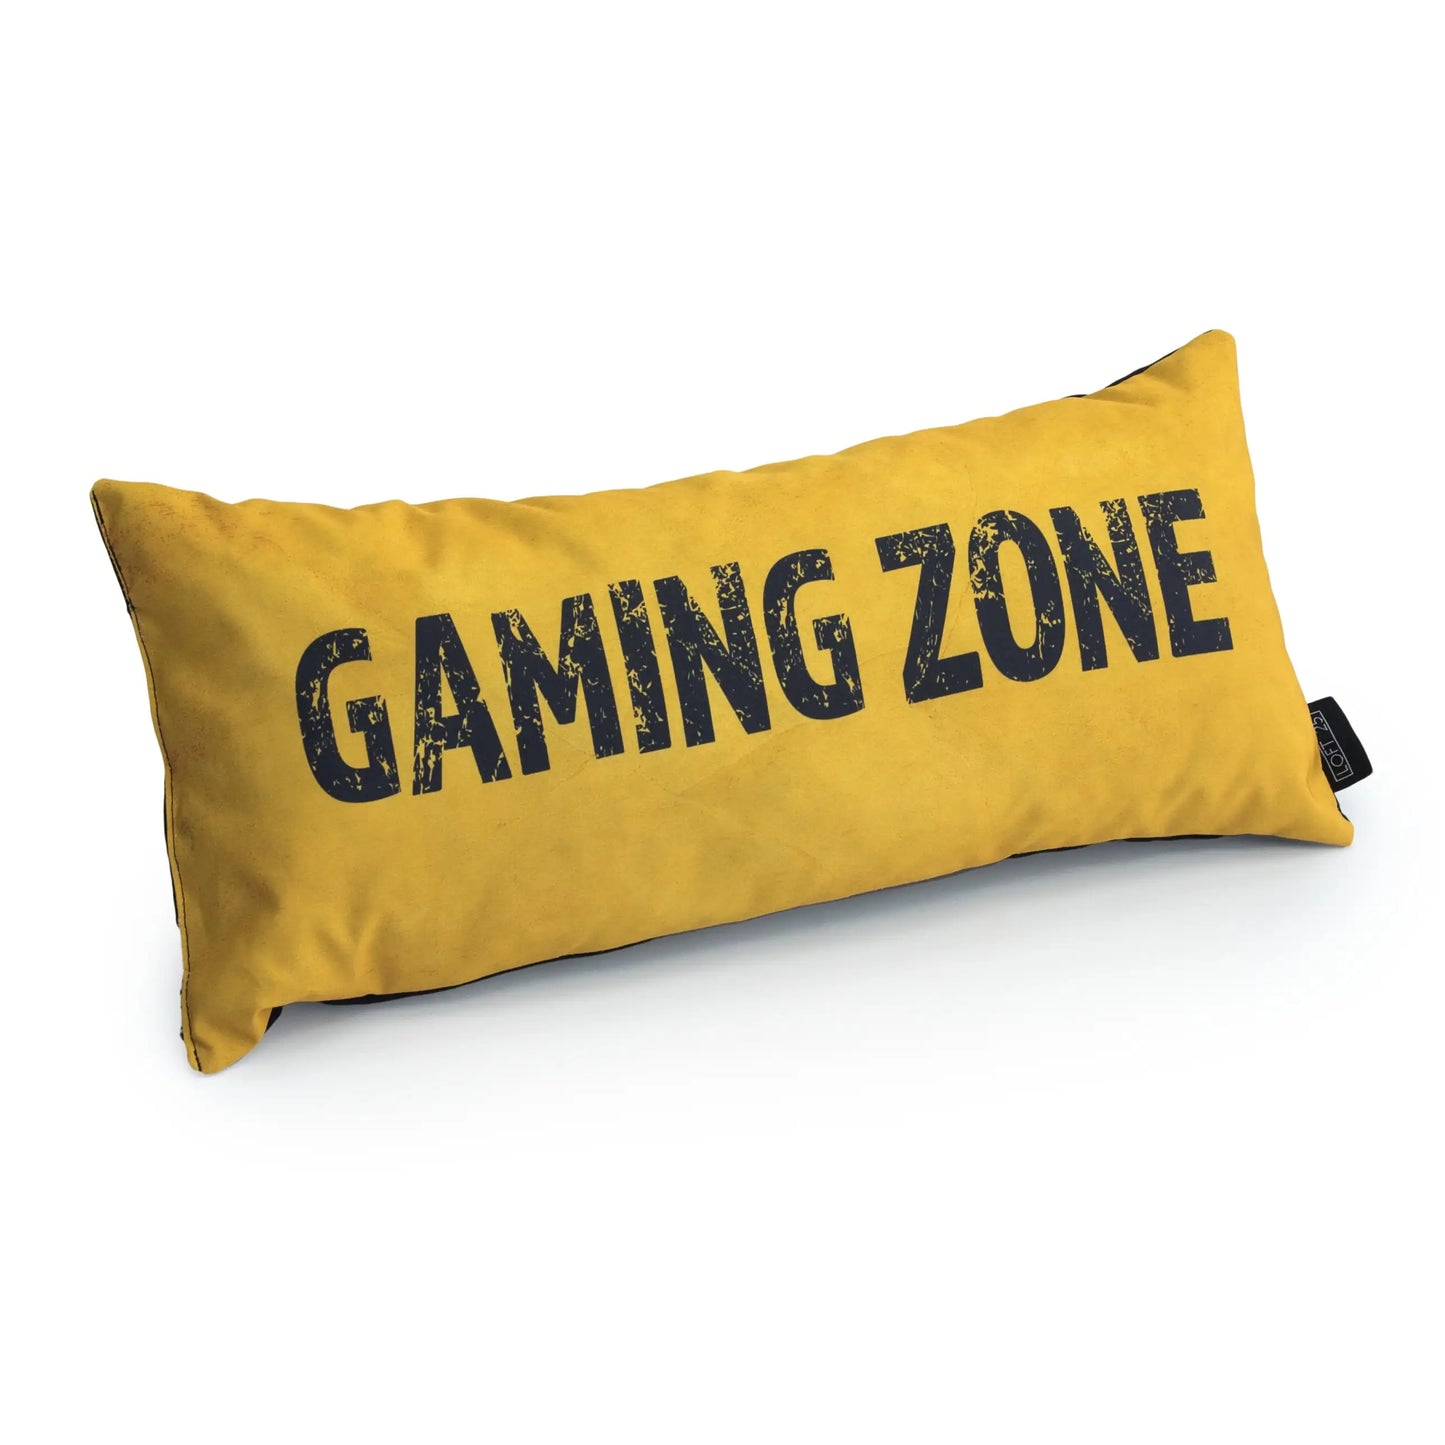 A yellow pillow with the words "GAMING ZONE" written on it in black.